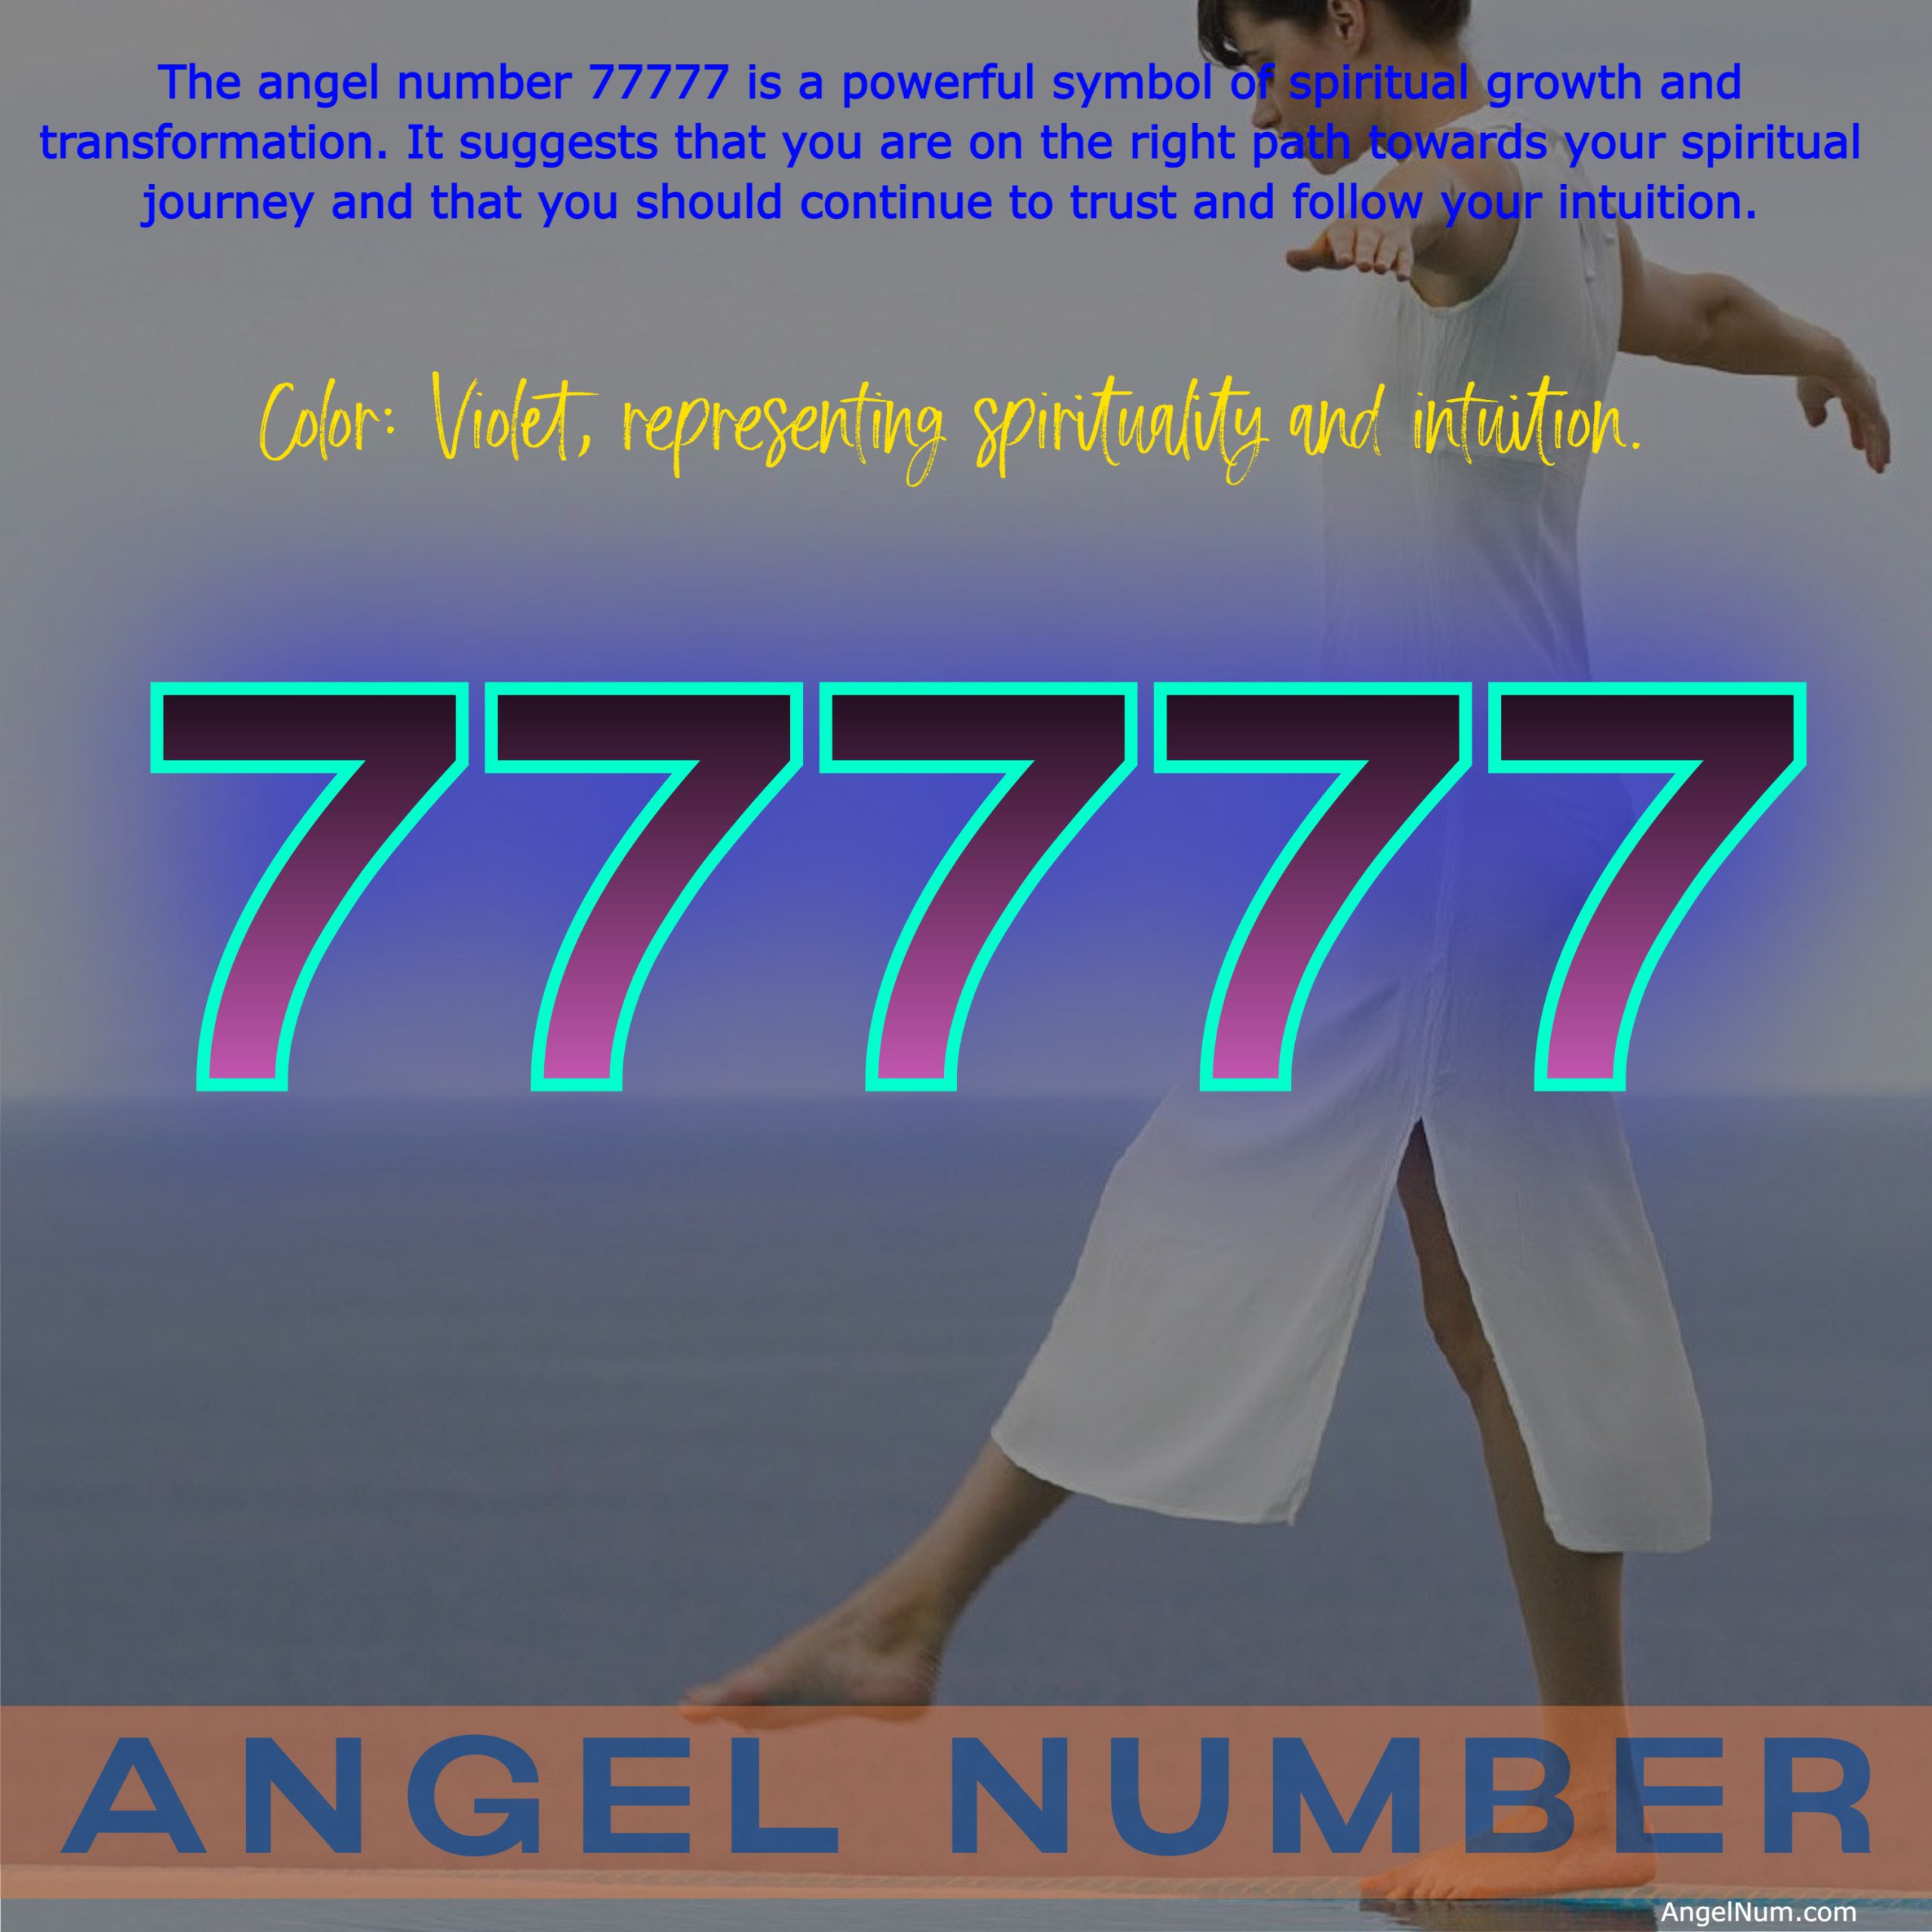 Angel Number 77777: Spiritual Growth and Transformation